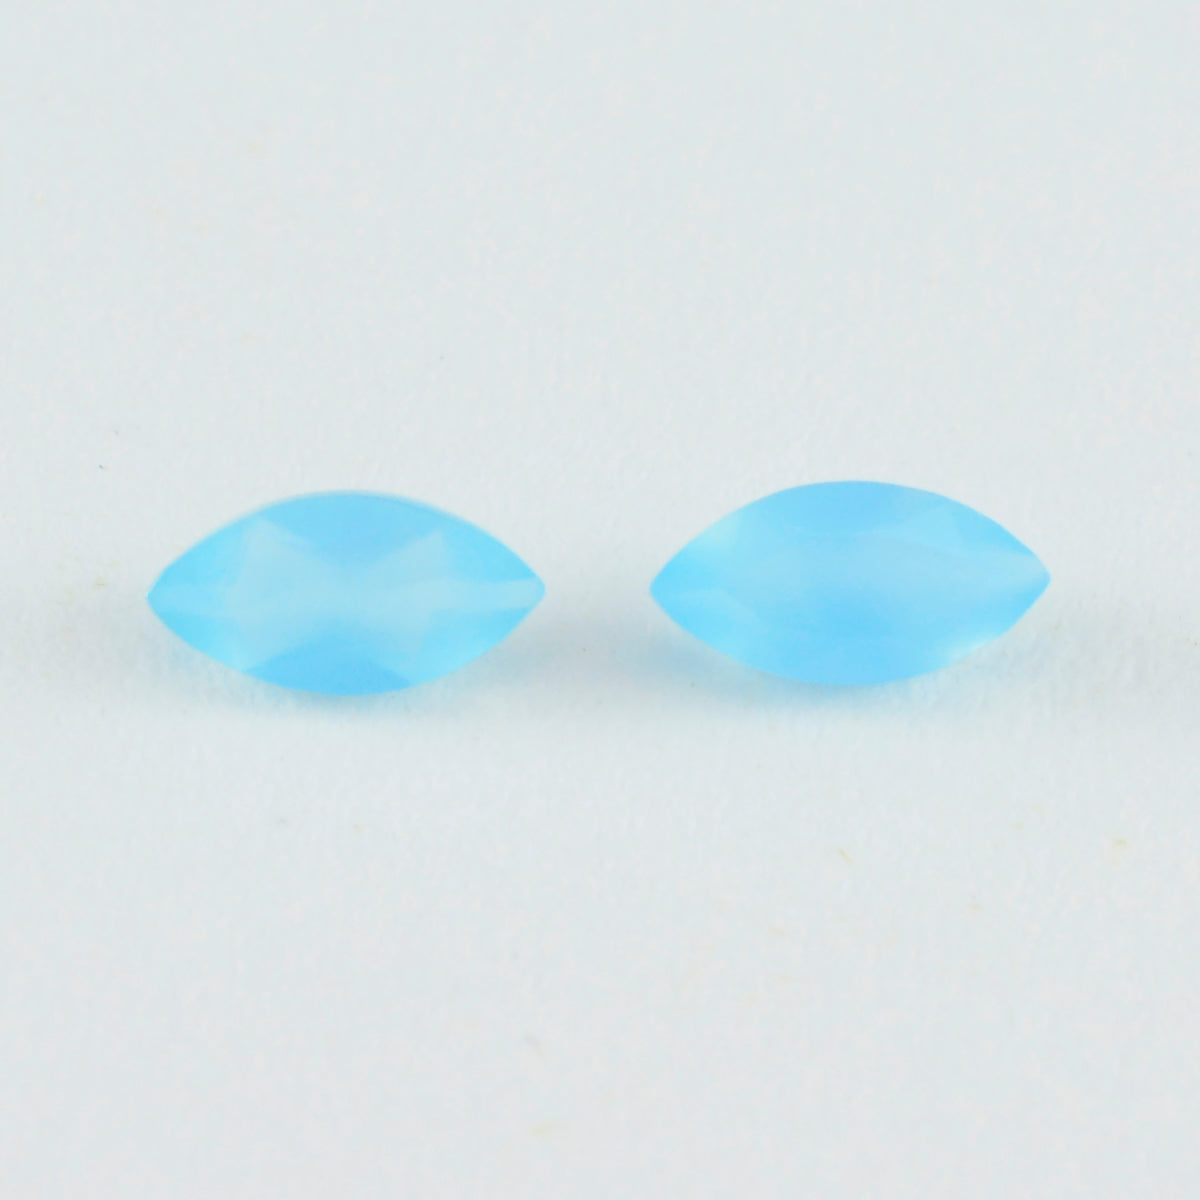 Riyogems 1PC Real Blue Chalcedony Faceted 8x16 mm Marquise Shape A1 Quality Gem